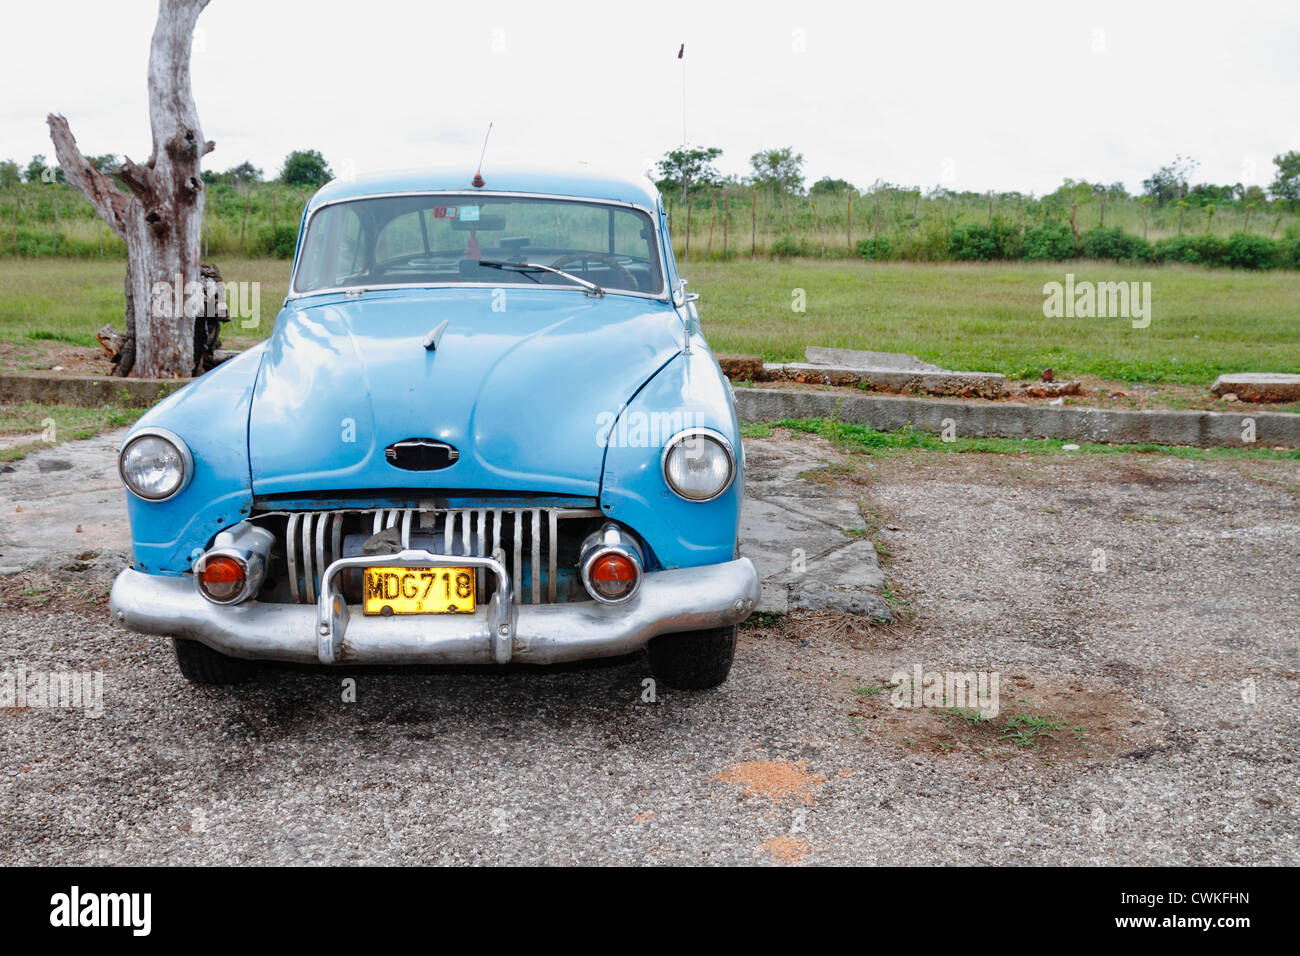 Blue color old classical American car in Cuba Stock Photo